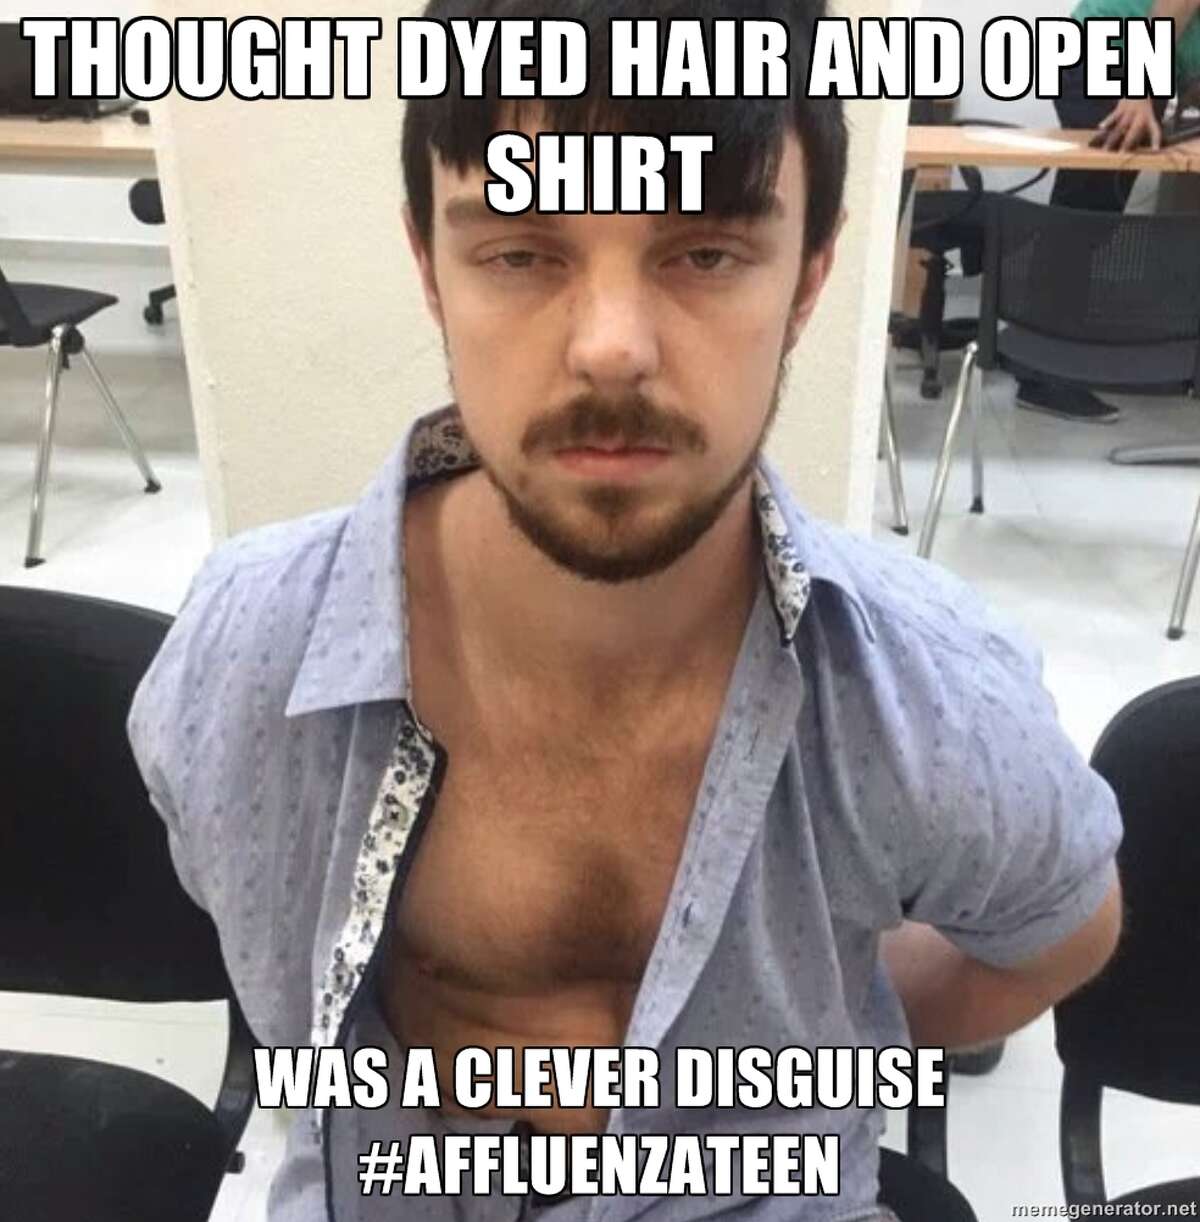 Ethan Couch's "affluenza" defense has sparked Internet memes such as this one, as seen on MemeGenerator.net.